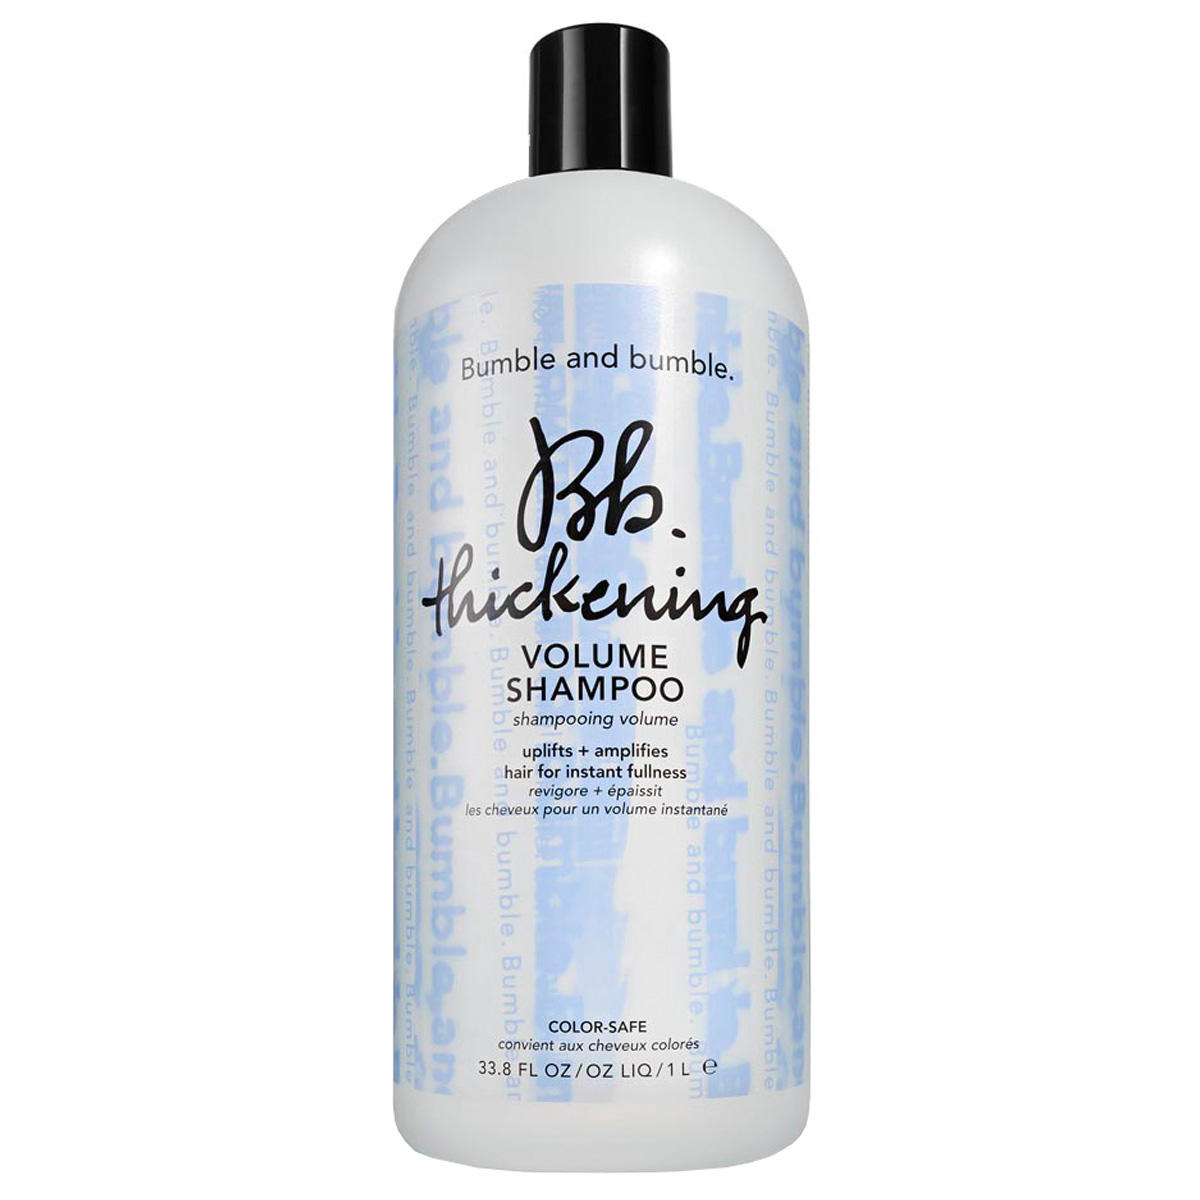 Bumble and bumble Bb. Thickening Shampoo volume 1000 ml - 1